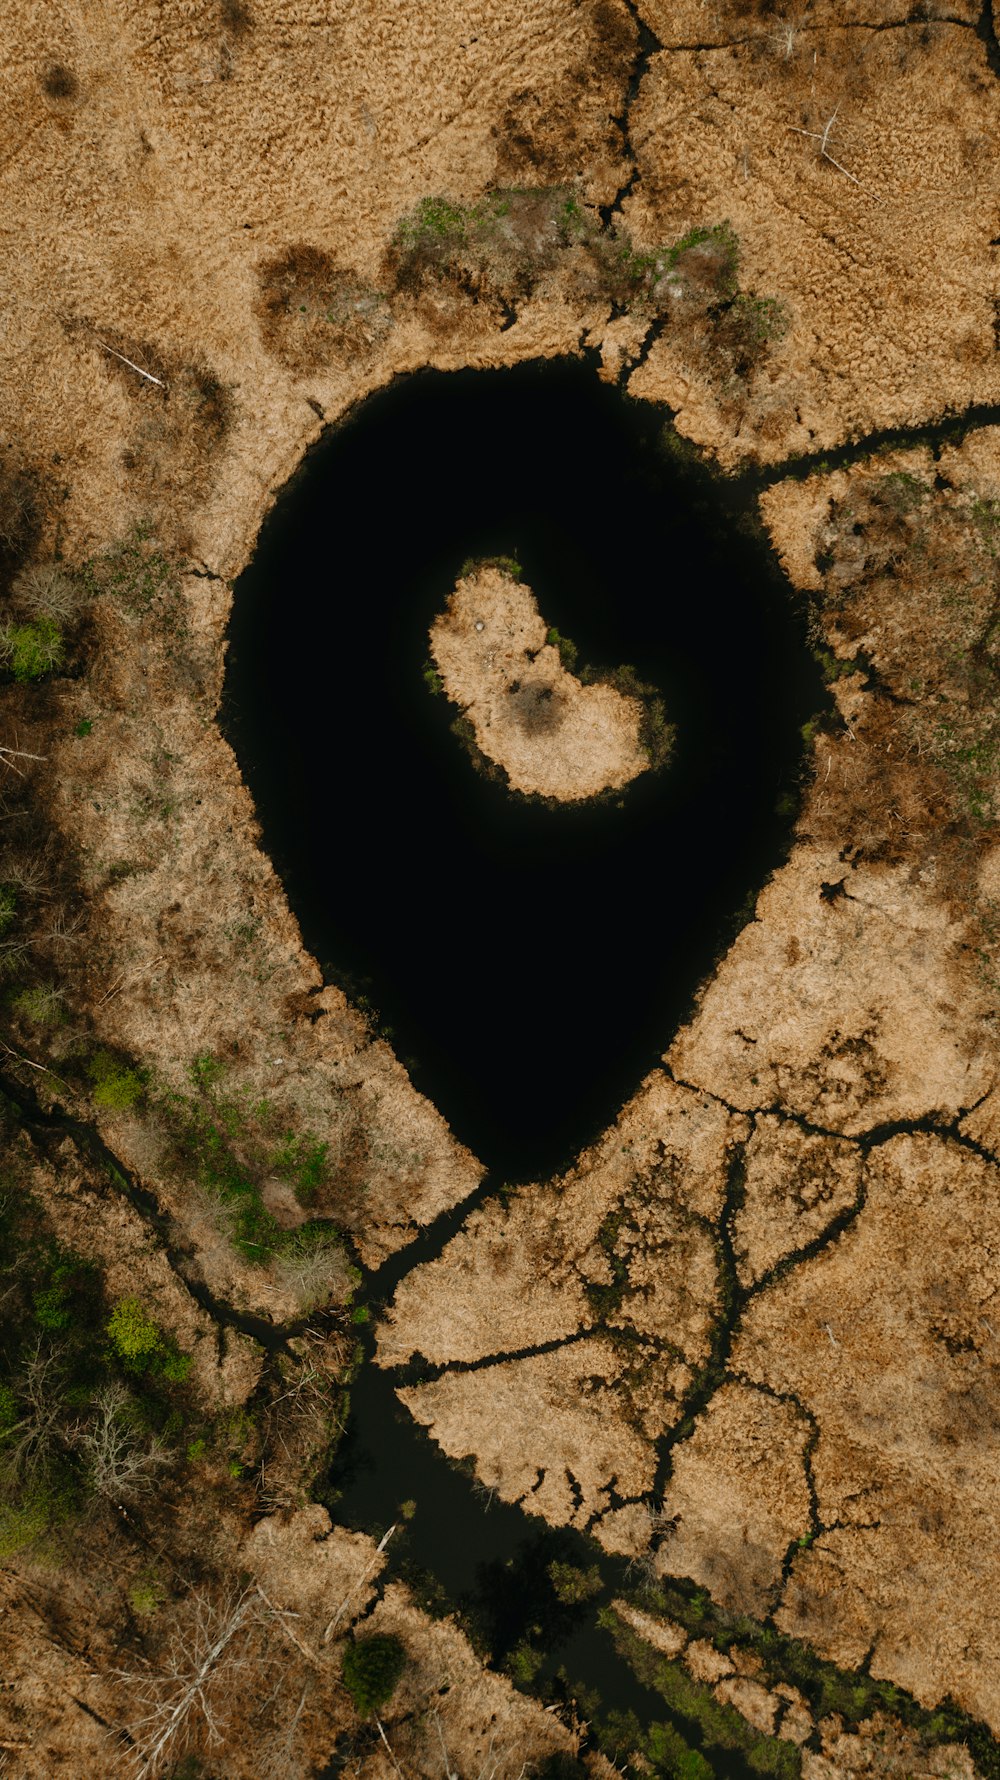 heart shaped hole on brown soil